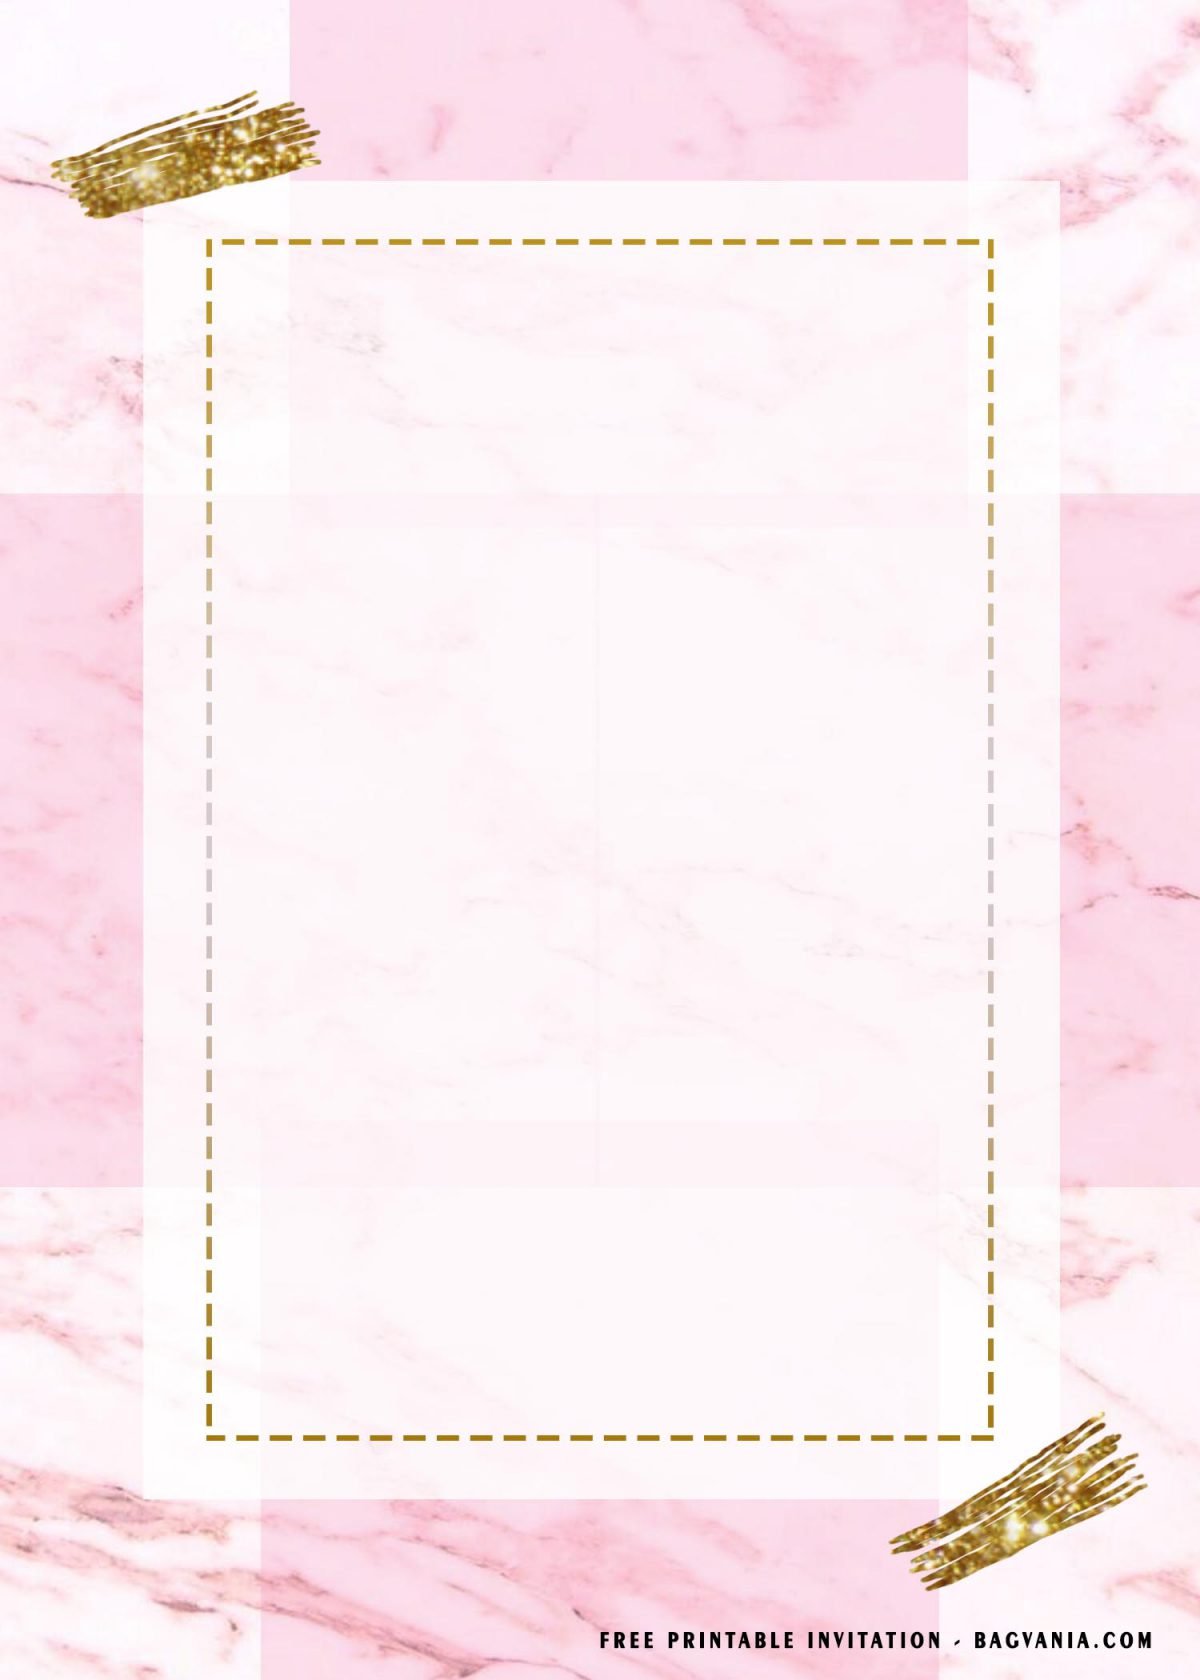 Free Printable Blank Rectangle Birthday Invitation Templates With Gold Dash Lines and Portrait Design